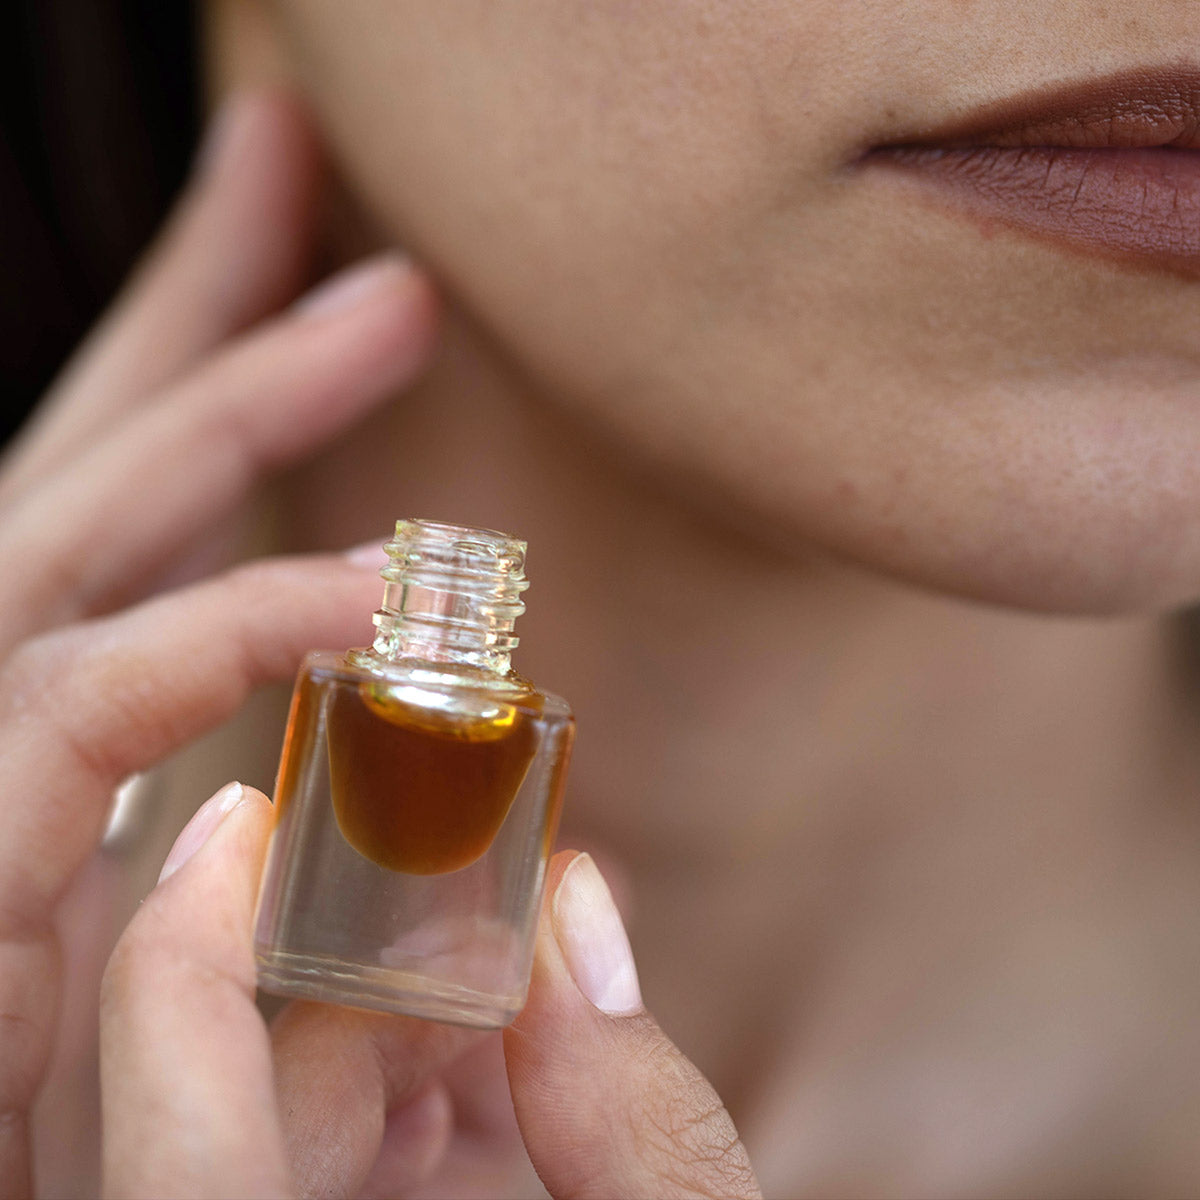 model applying patchouli essential oil perfume to neck